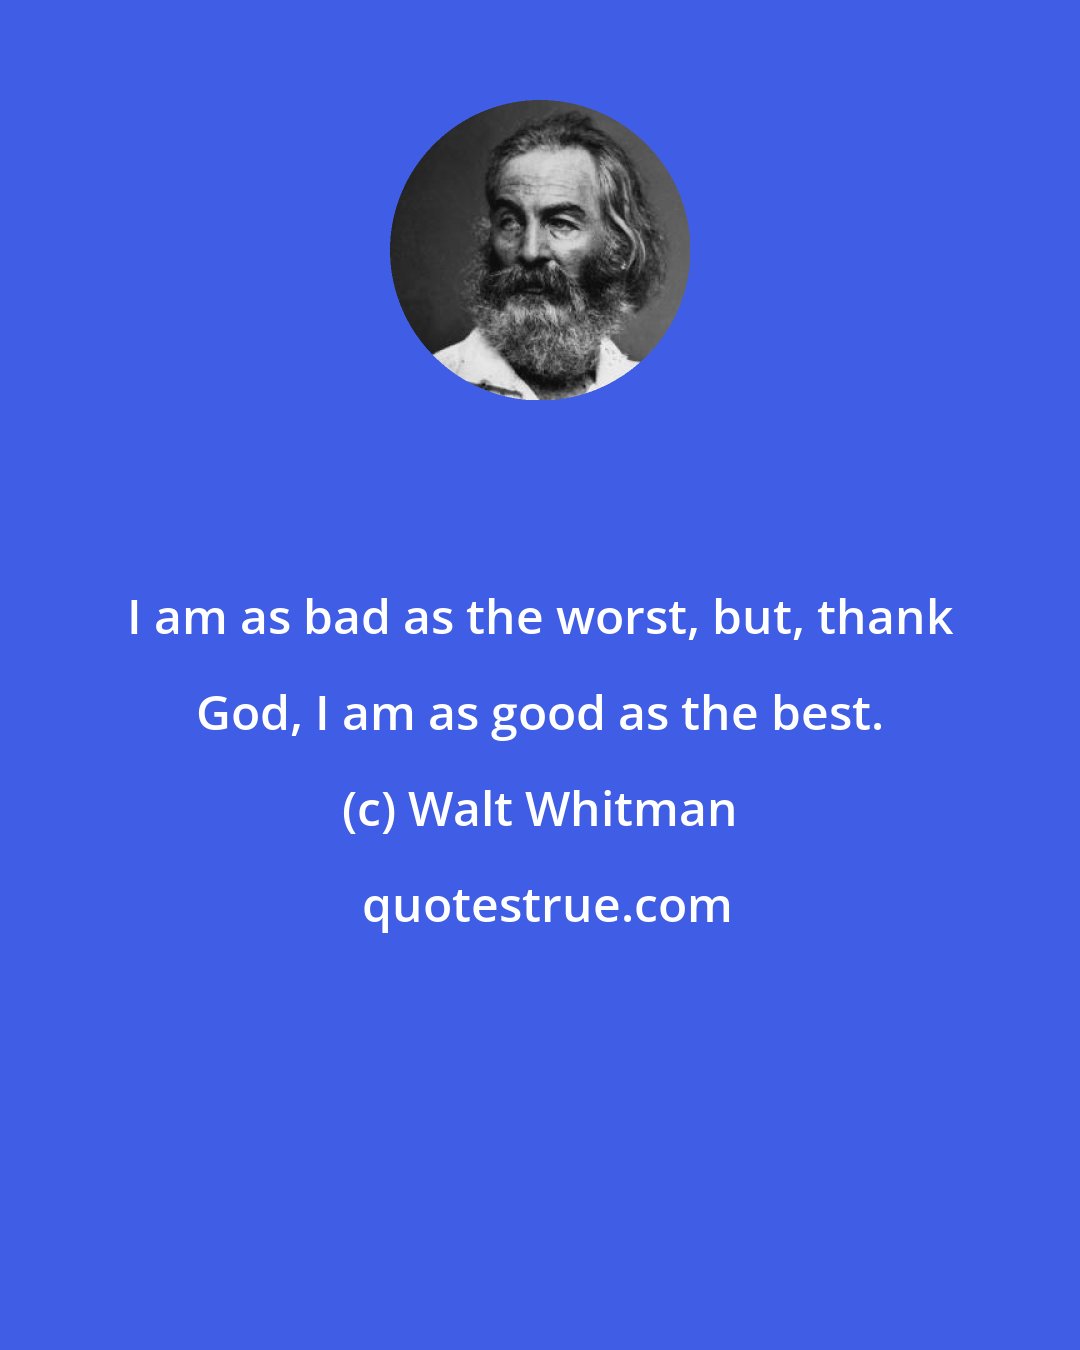 Walt Whitman: I am as bad as the worst, but, thank God, I am as good as the best.